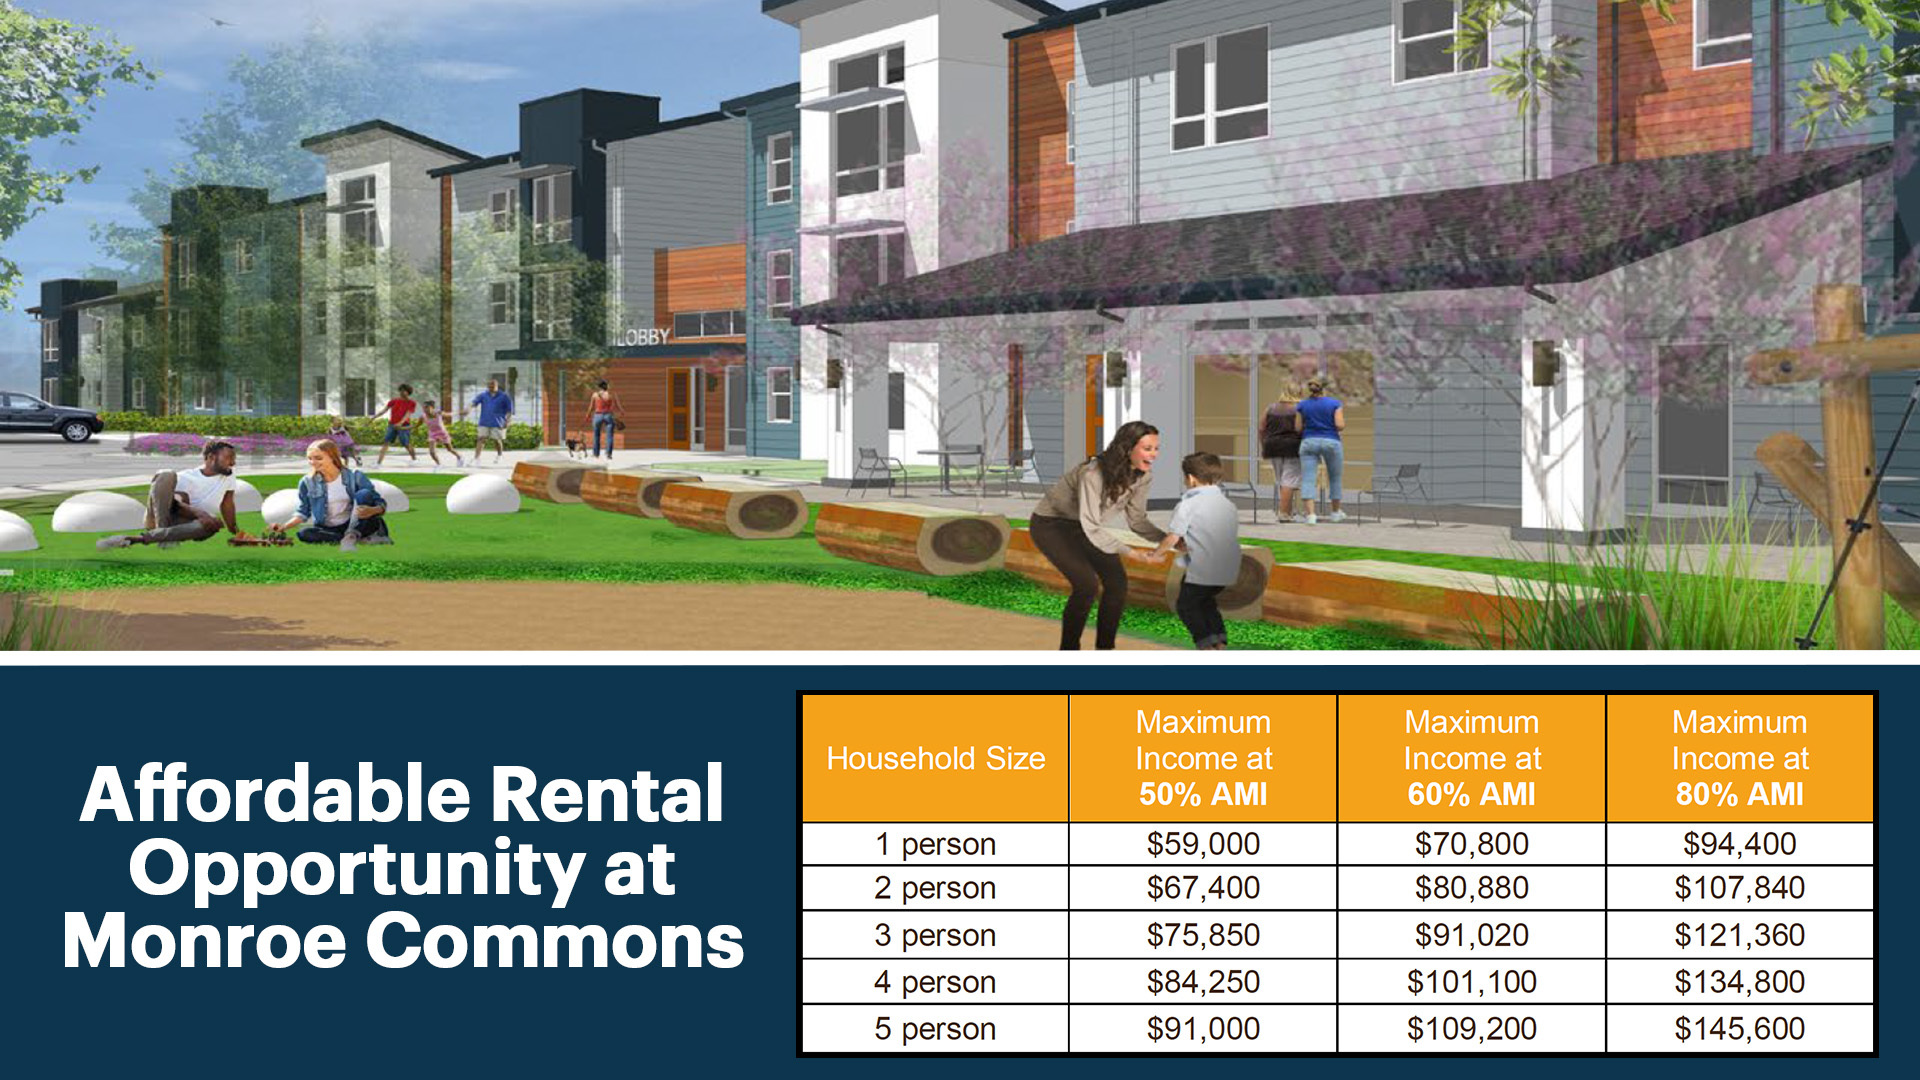 Affordable Rental Units Available at Monroe Commons